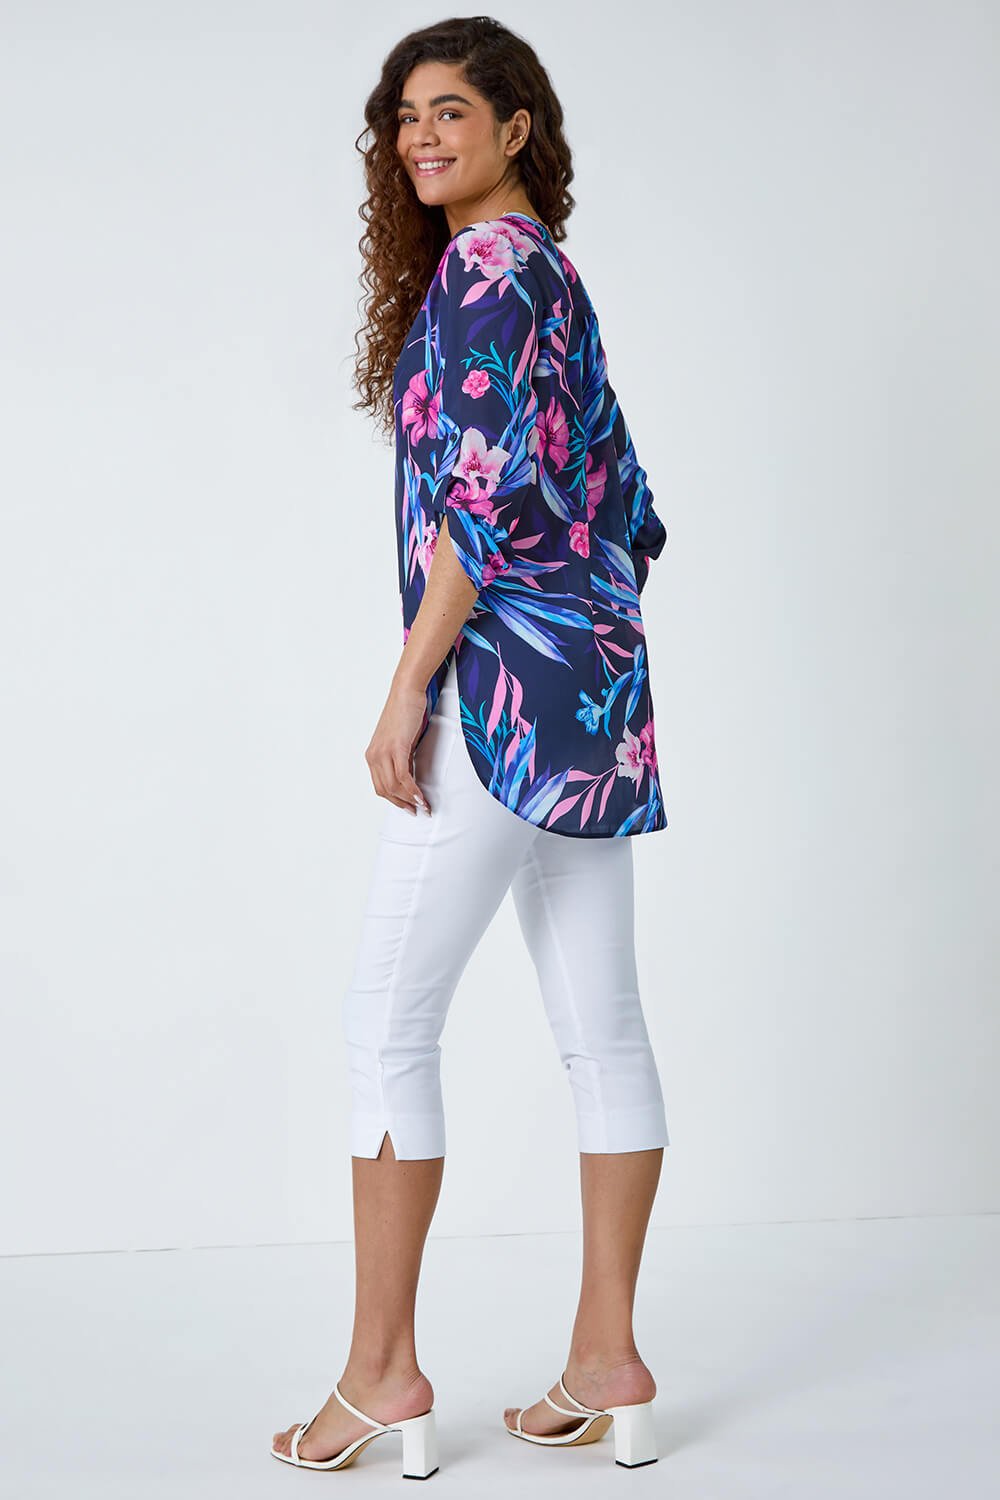 PINK Tropical Print Longline Blouse, Image 3 of 5